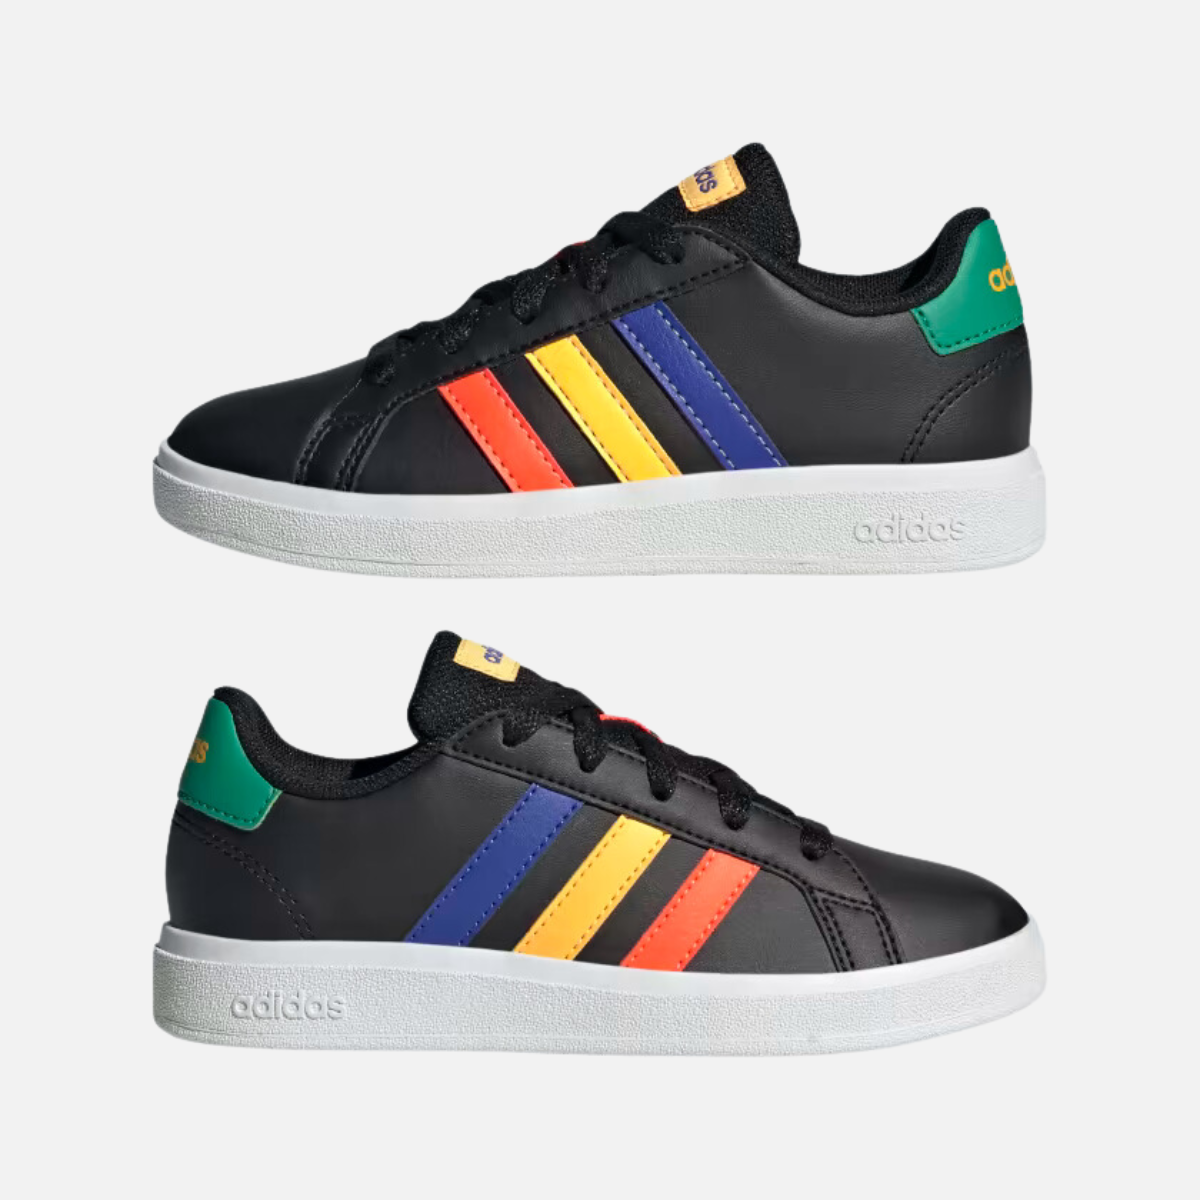 Adidas Grand Court Lifestyle Tennis Lace-up Youth Unisex Shoes BOY AND GIRL (8-16 YEAR) -Core Black/Lucid Blue/Court Green